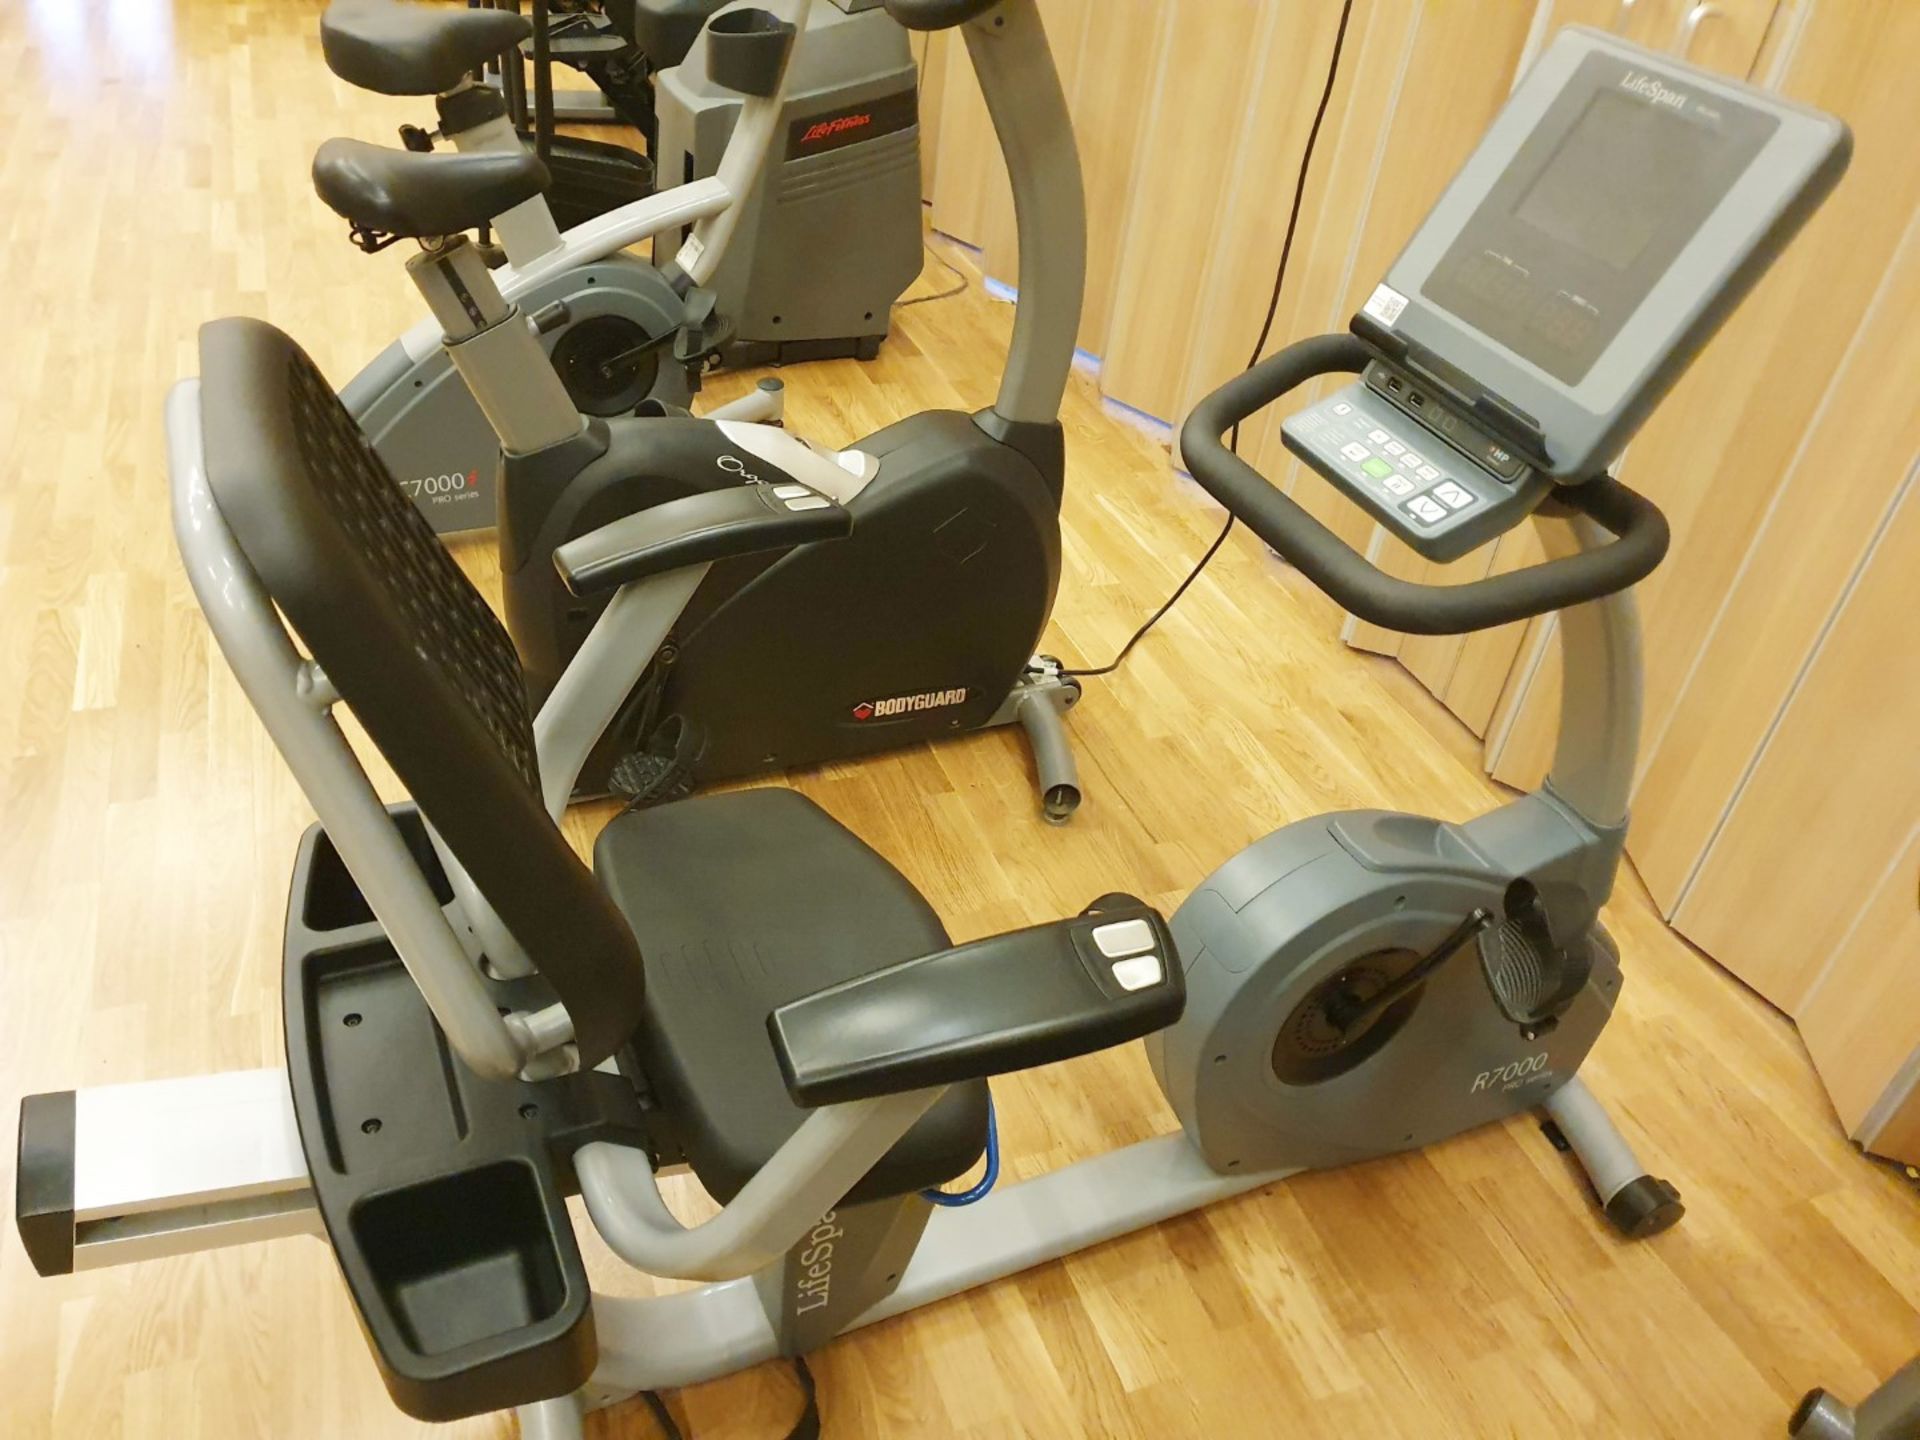 1 x Lifespan R7000 Pro Series Excercise Bike With USB Connectivity - Approx RRP £1,500 - CL552 - - Image 6 of 6